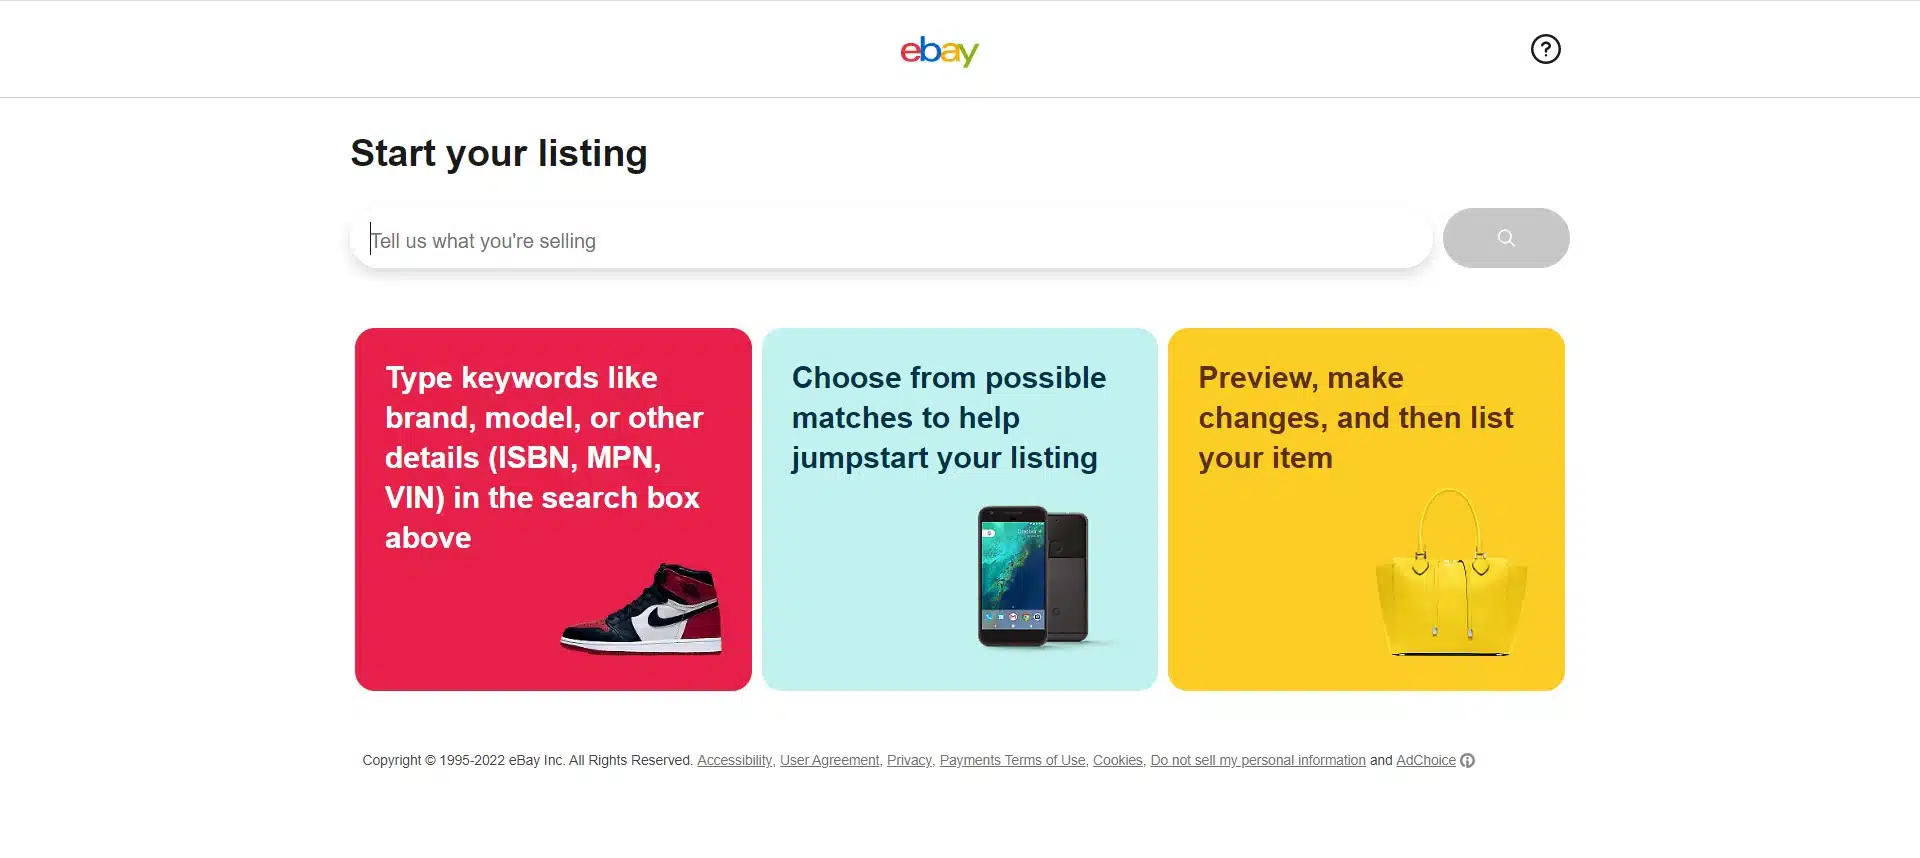 ebay clothes sellers listings